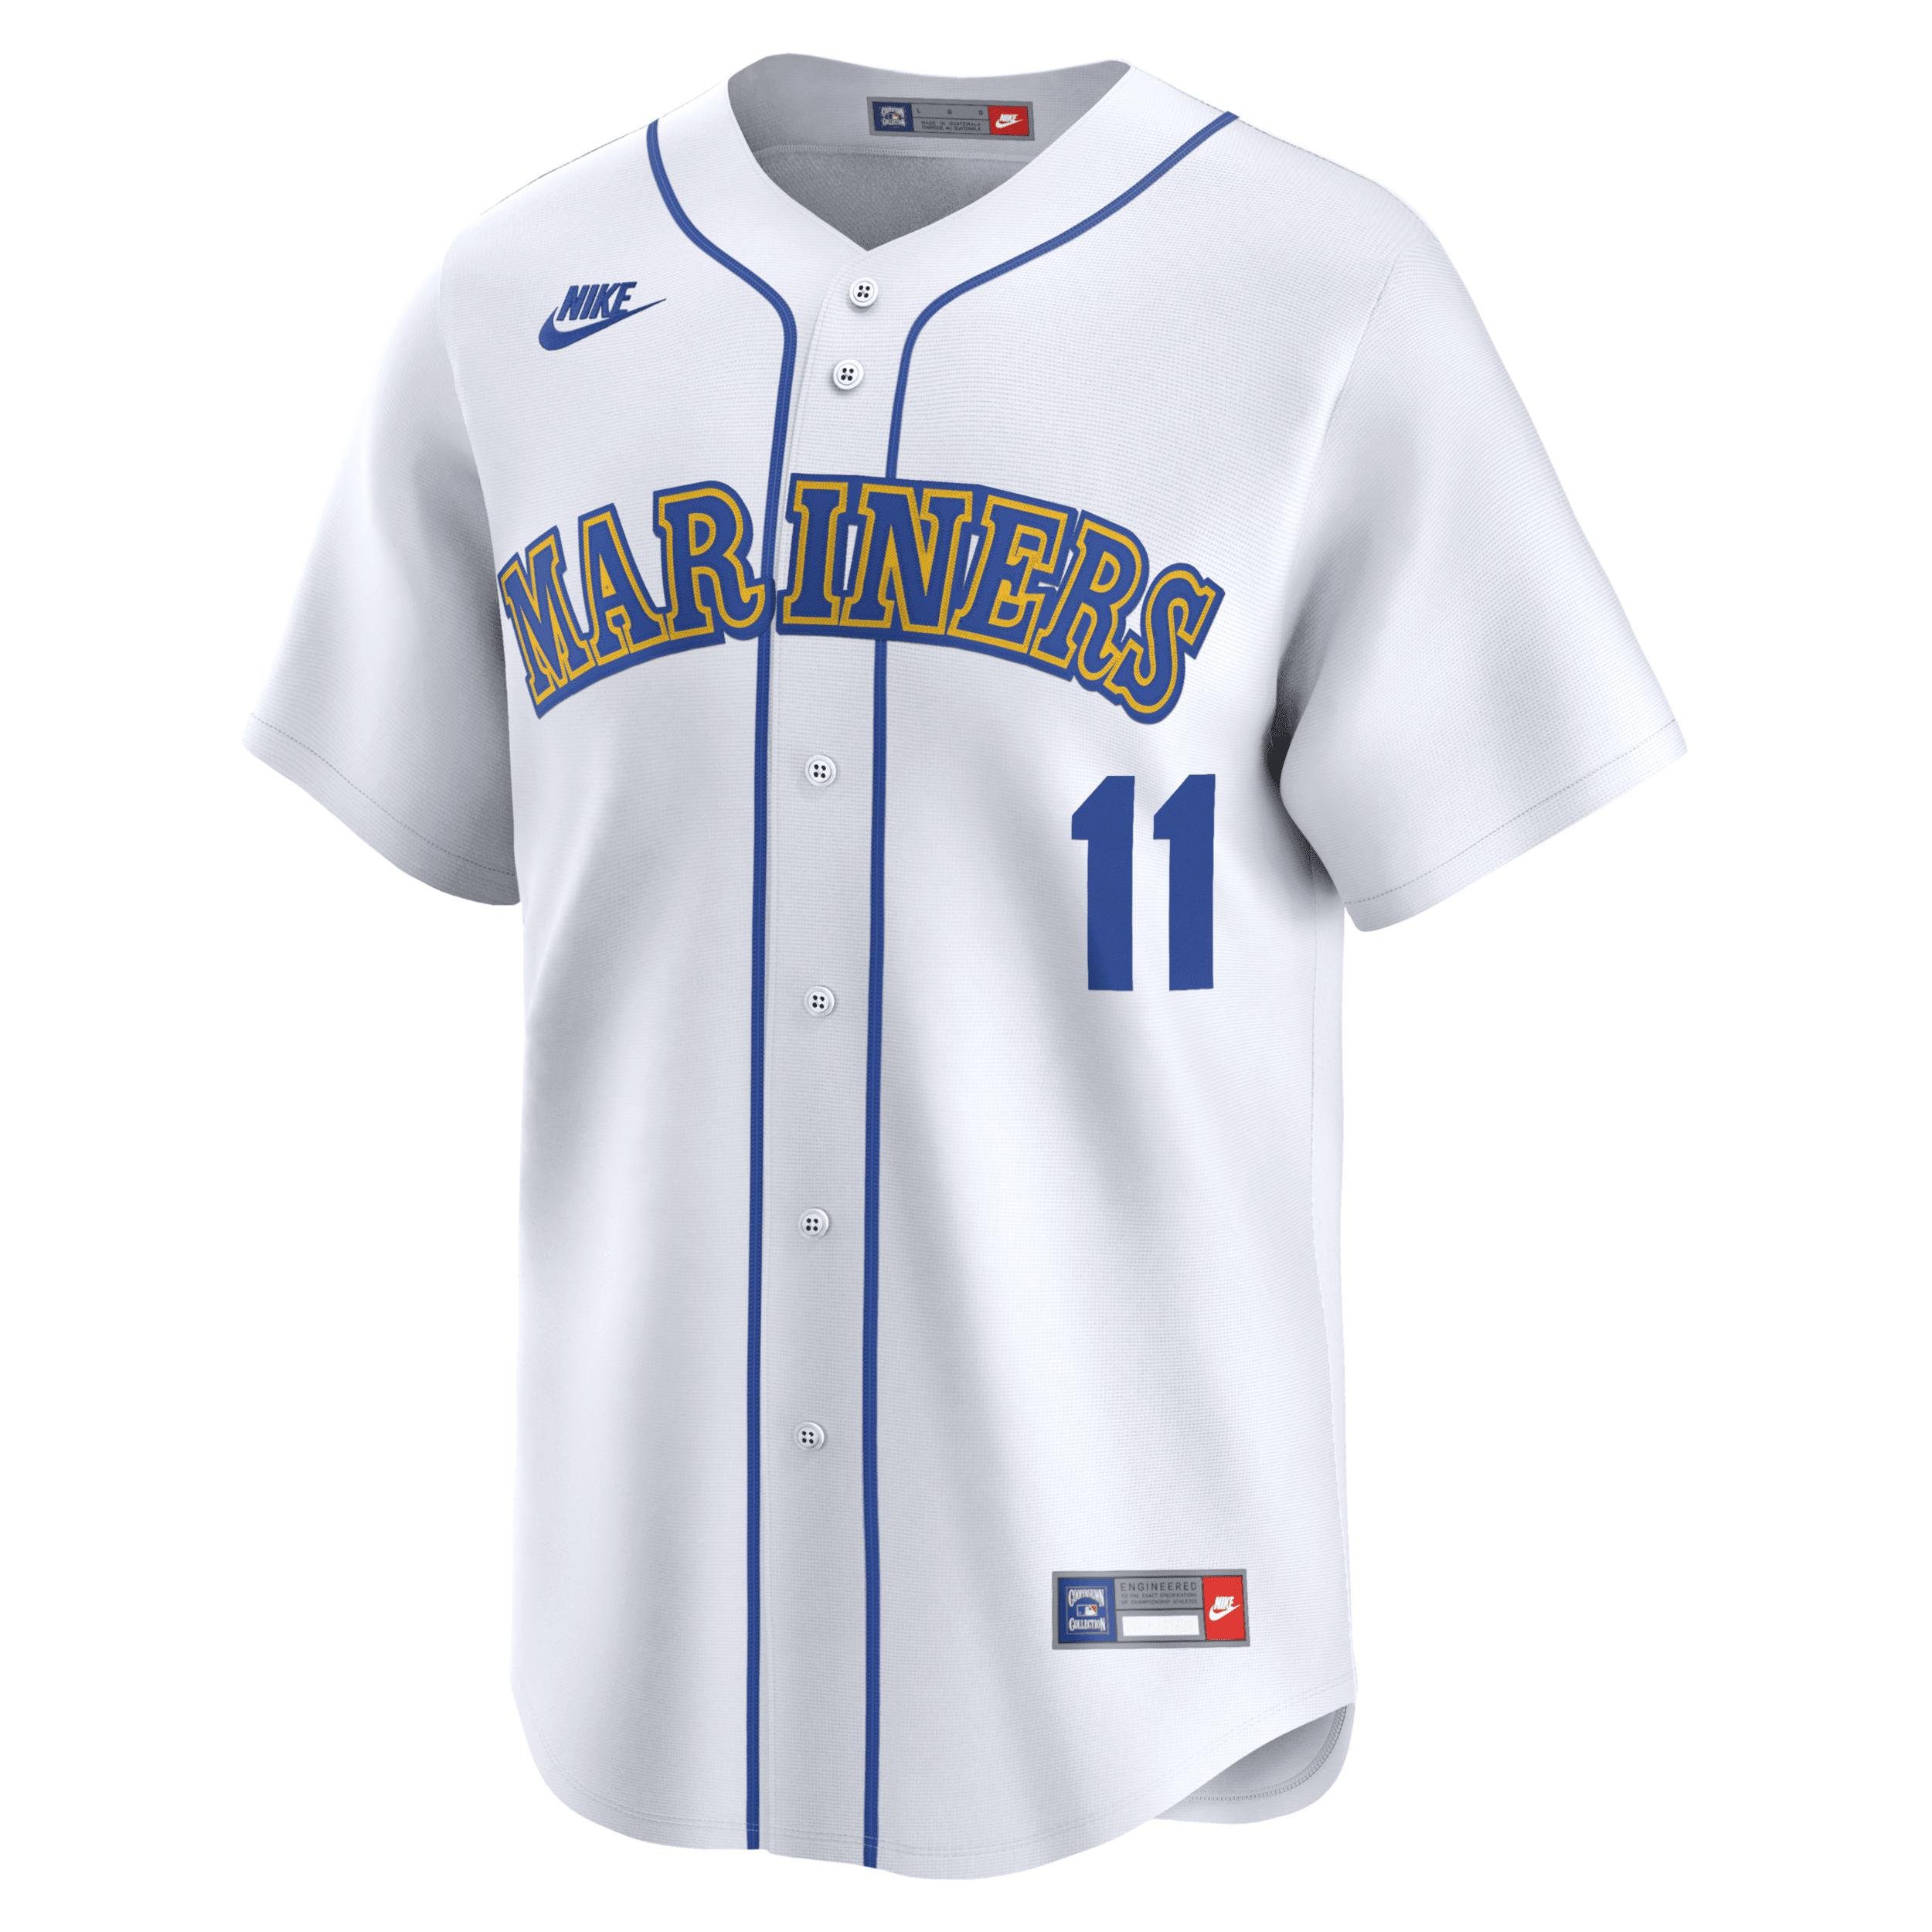 Edgar MartÃ­nez Seattle Mariners Cooperstown Nike Men's Dri-FIT ADV MLB Limited Jersey by NIKE